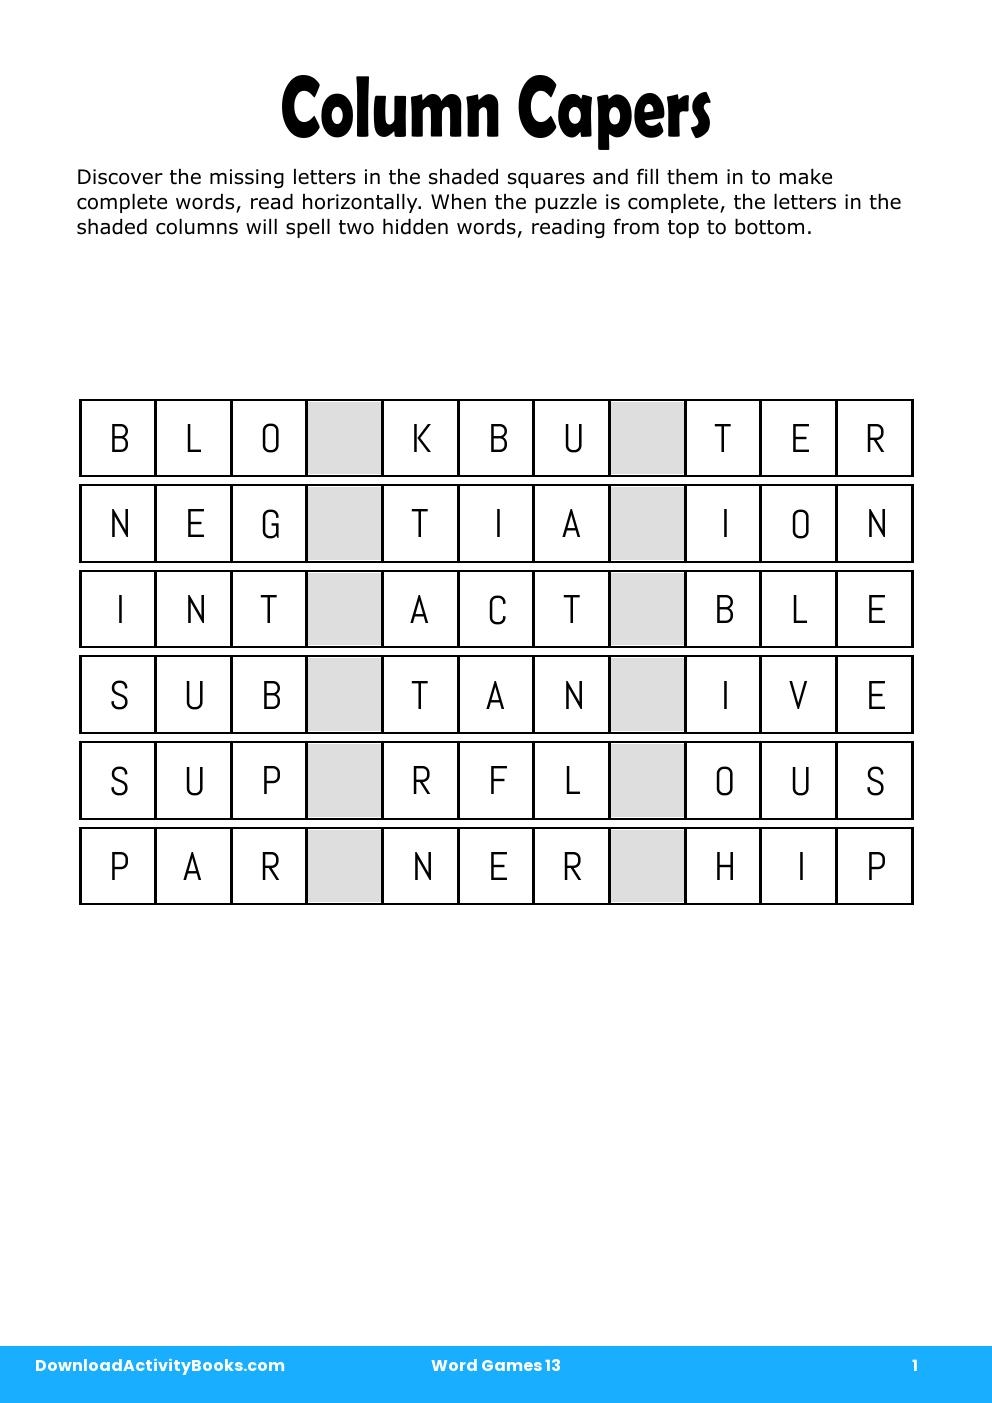 Column Capers in Word Games 13